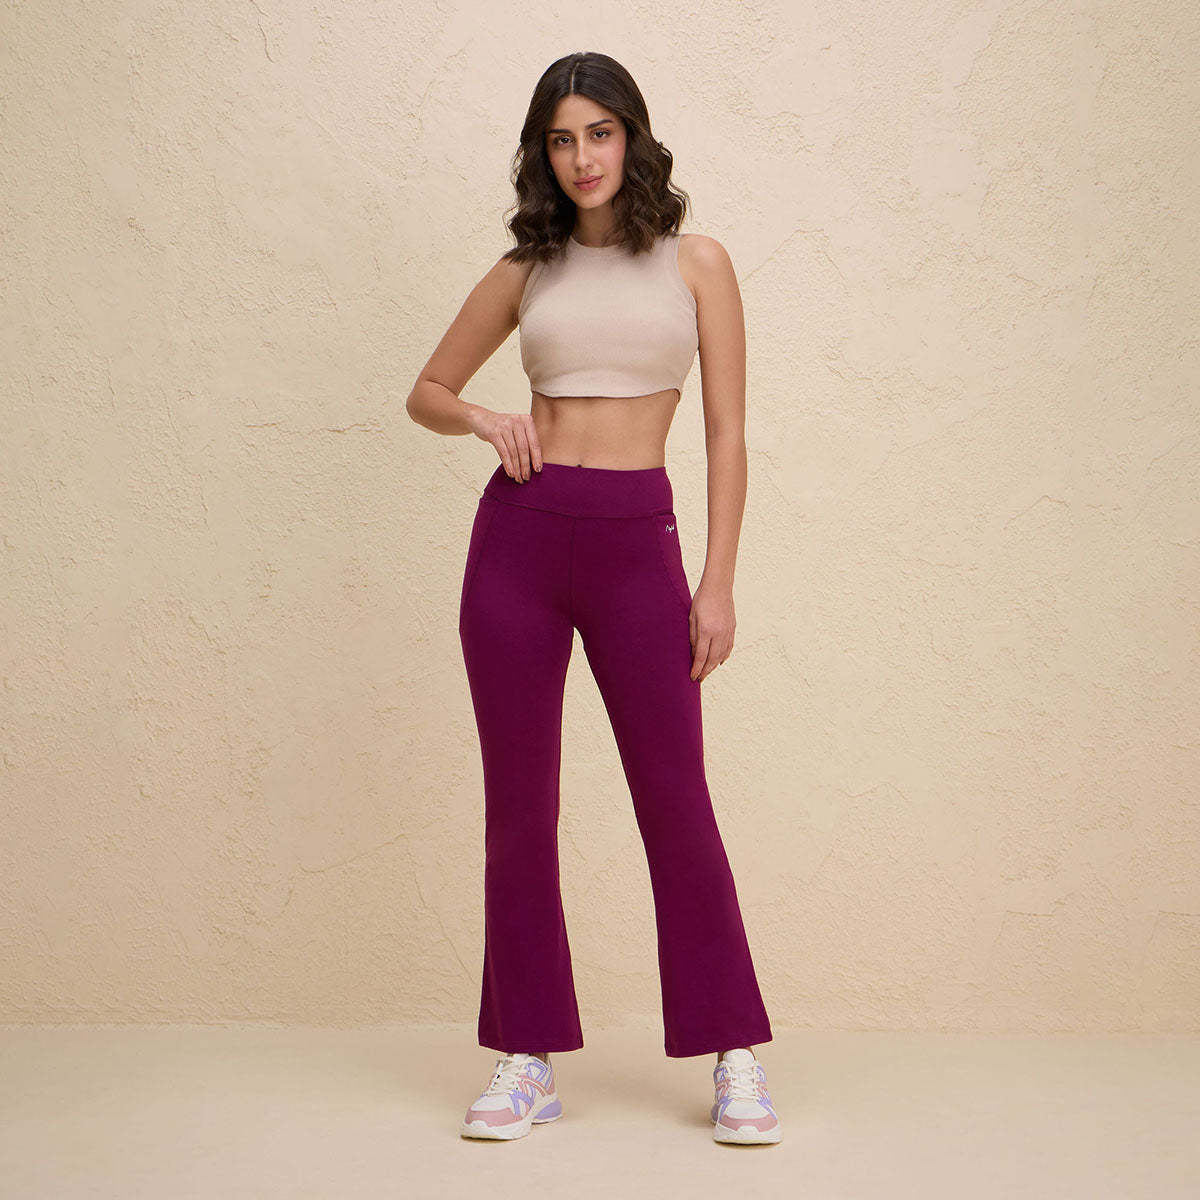 Nykd By Nykaa Iconic Super Comfy Cotton Flare Leggings with Pockets-NYAT503-Wine